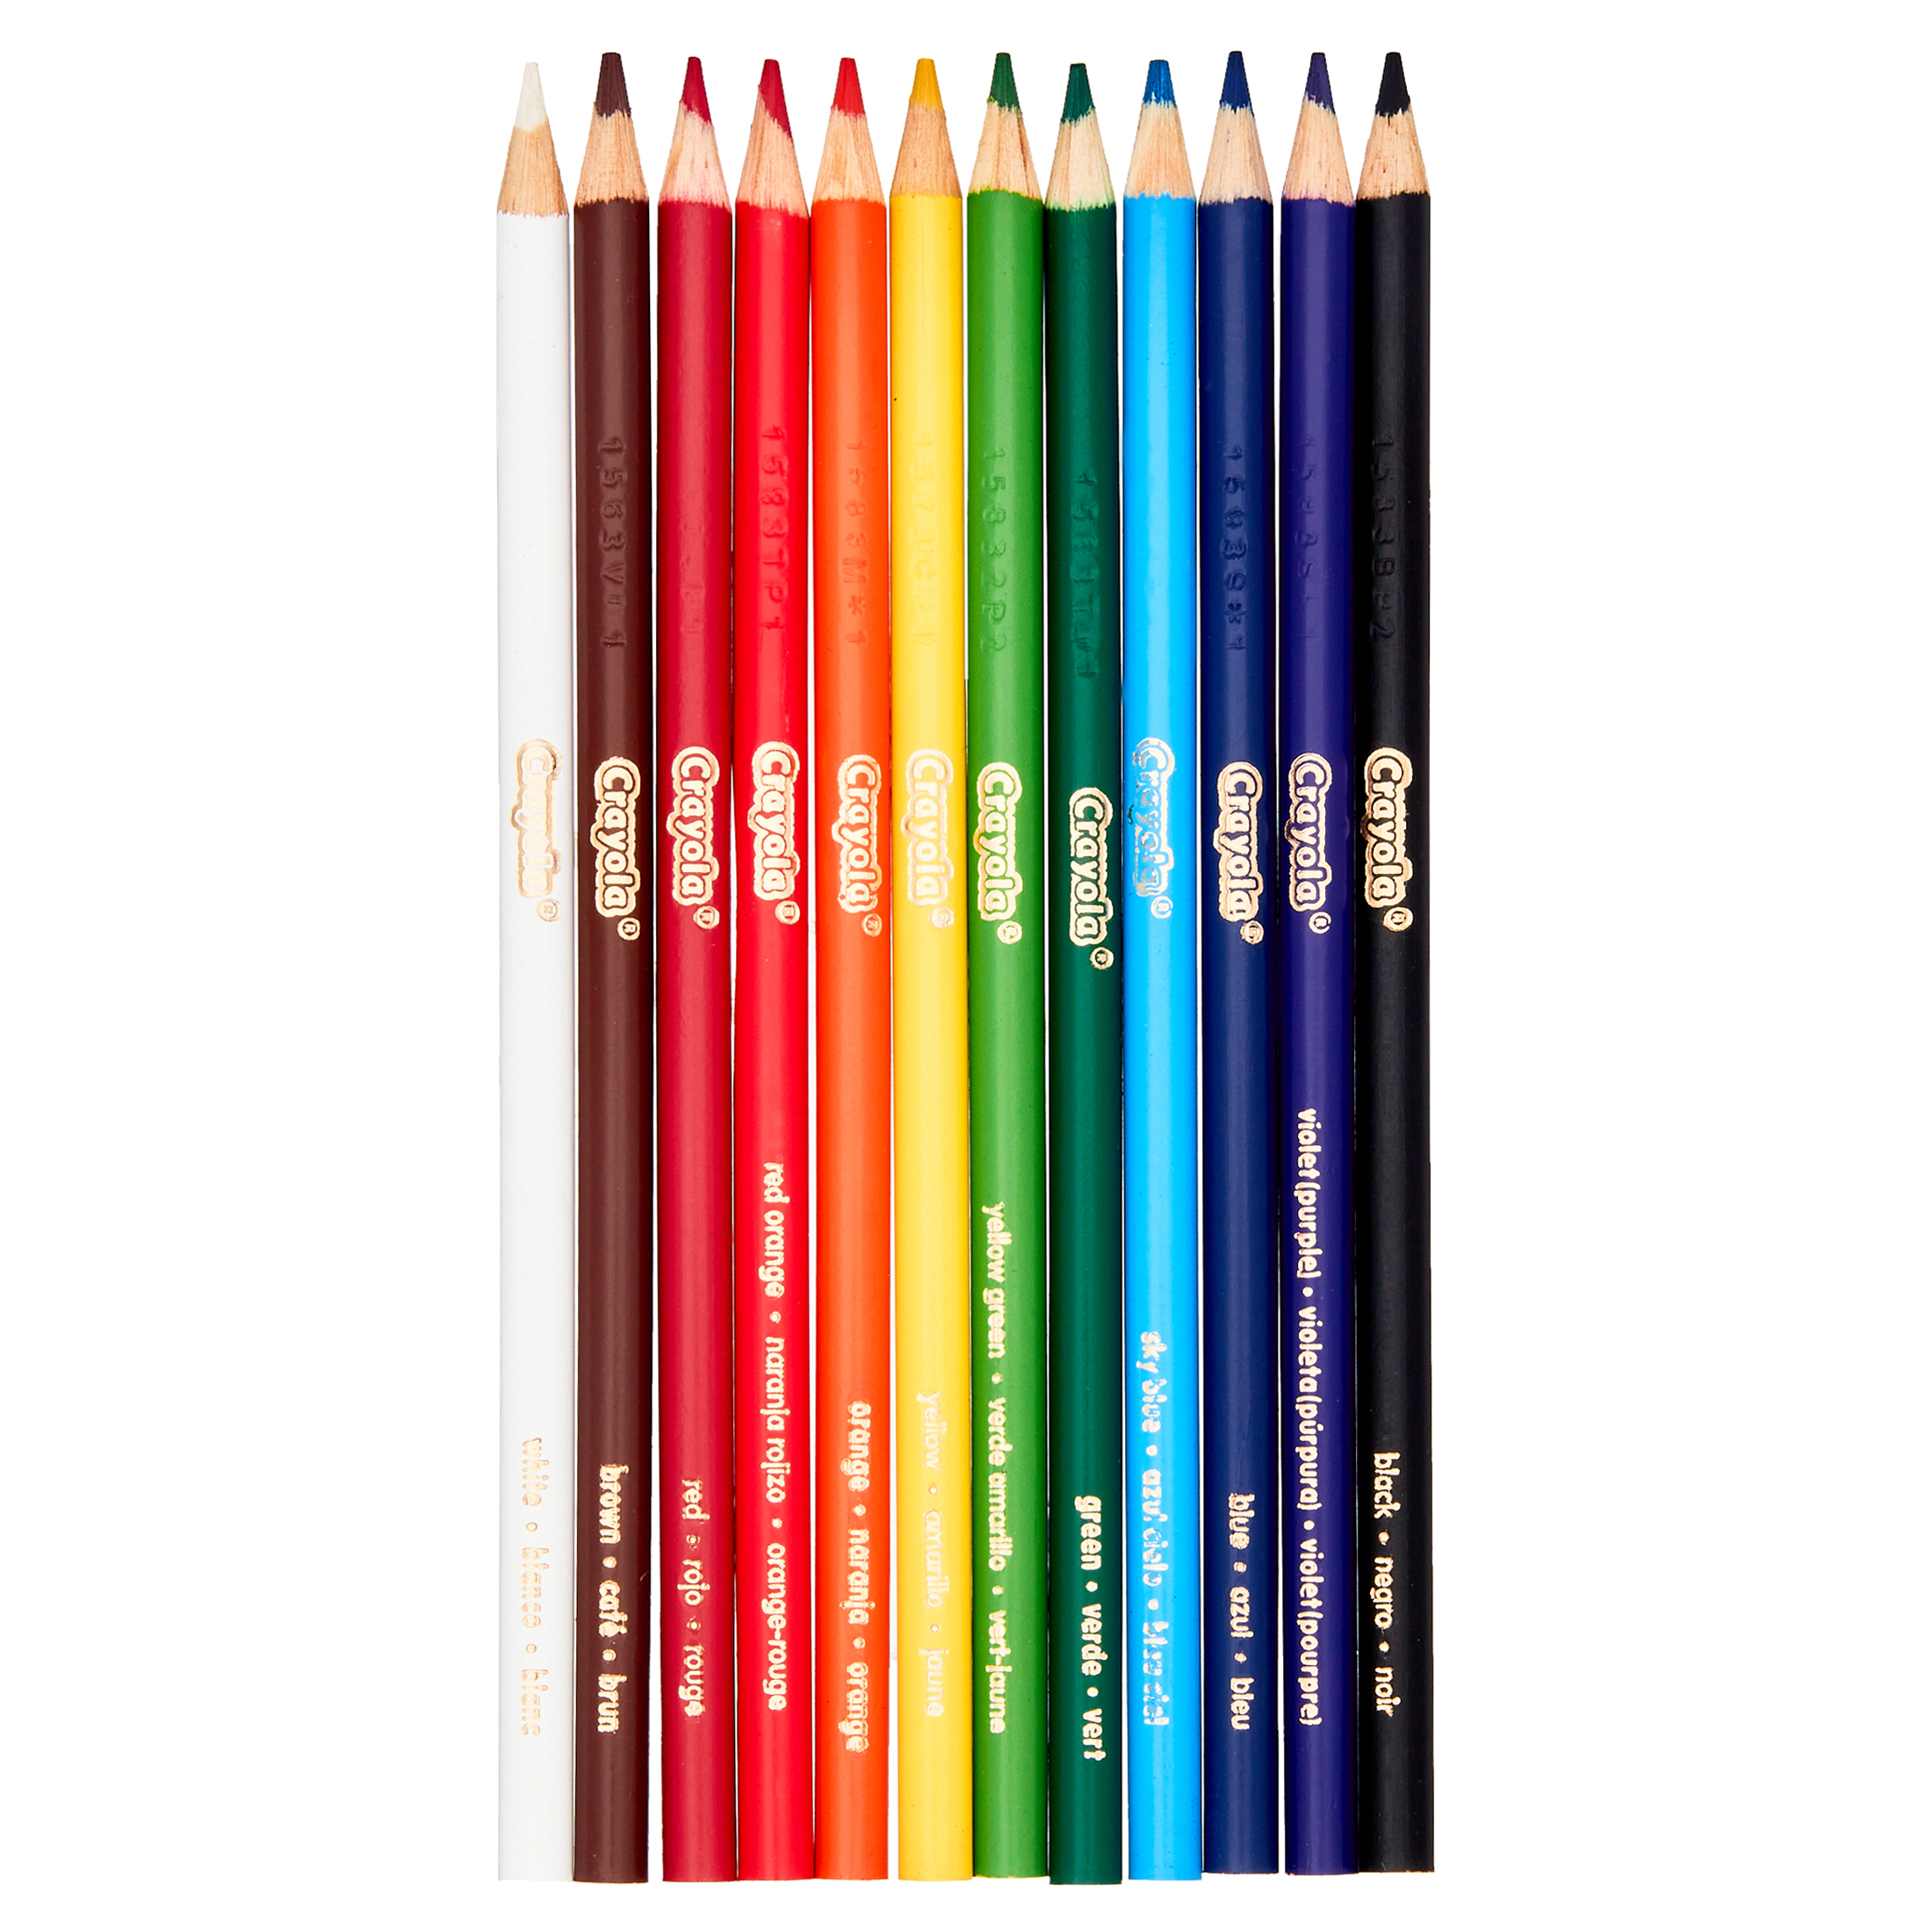 Crayola Colored Pencils, Assorted Colors, Pre-sharpened, Adult Coloring, 12 Count - image 5 of 9